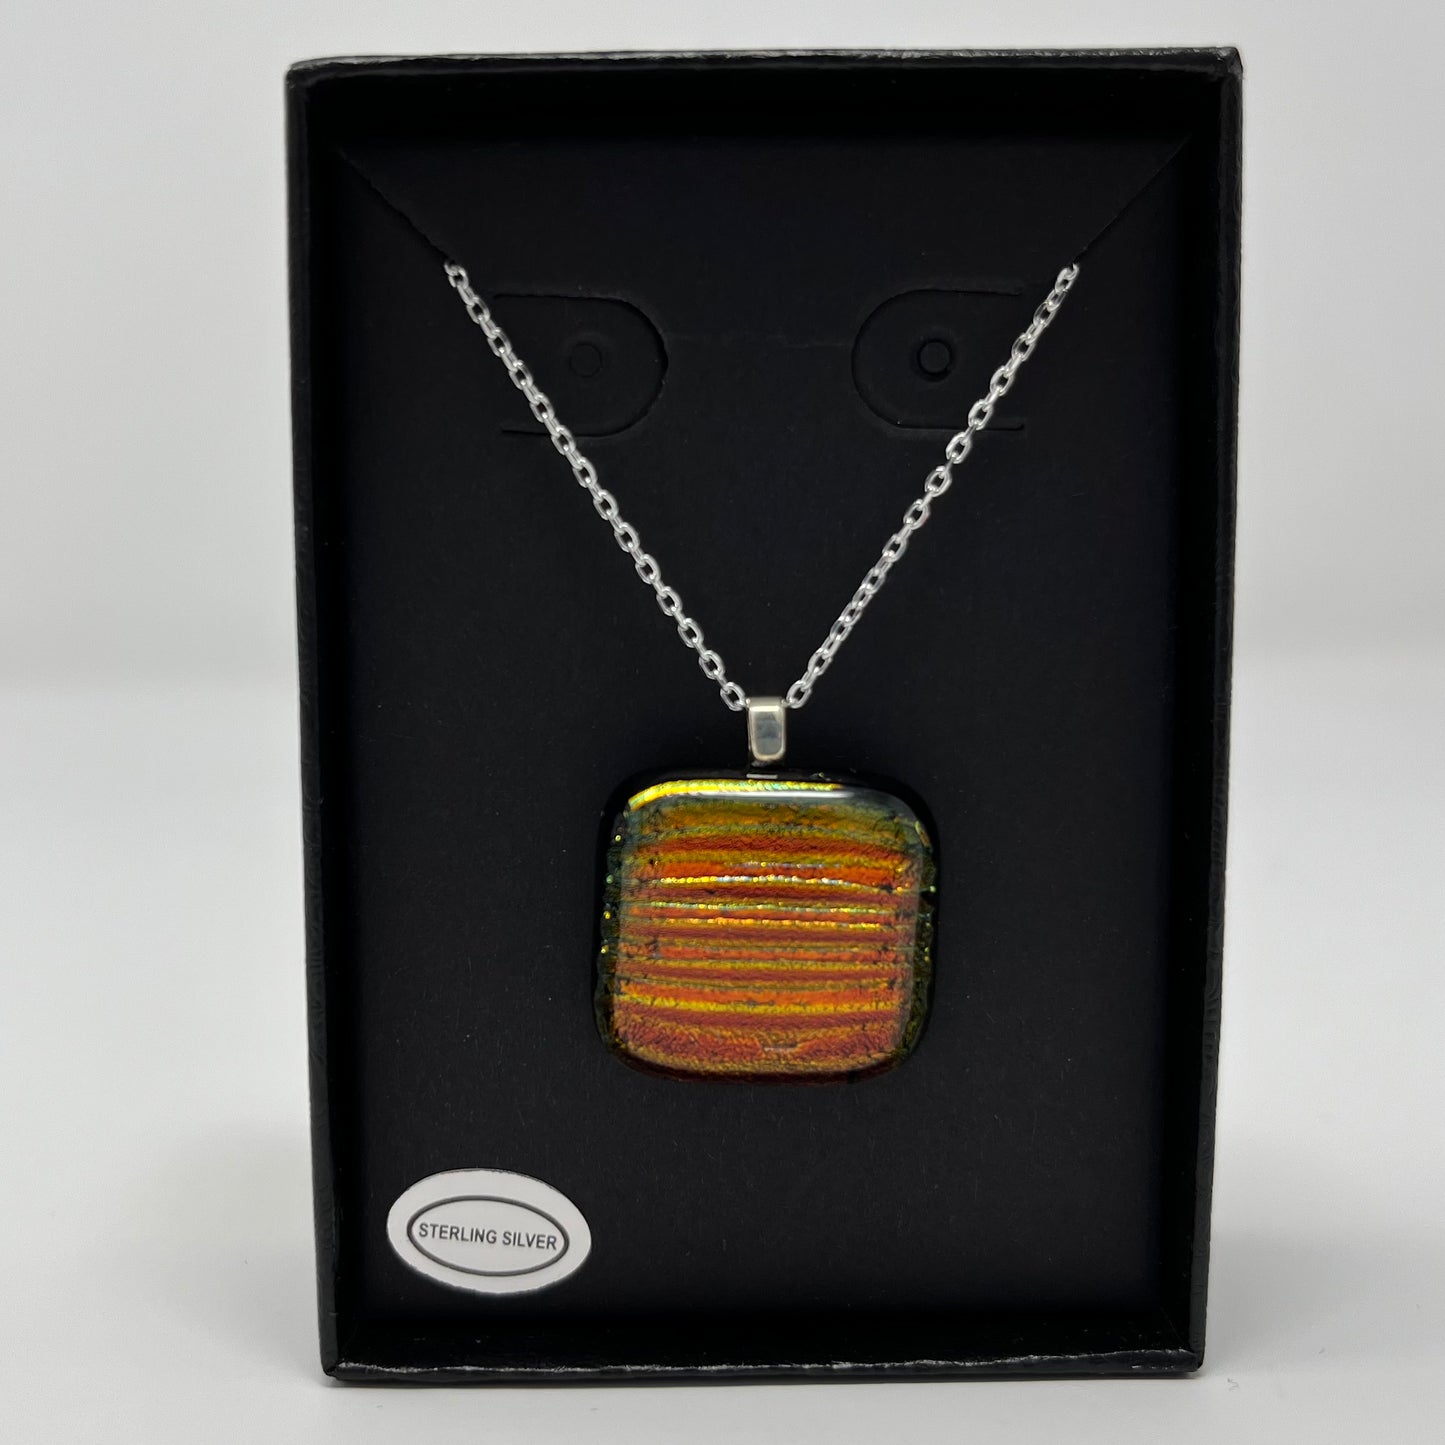 Red and Gold Striped necklace